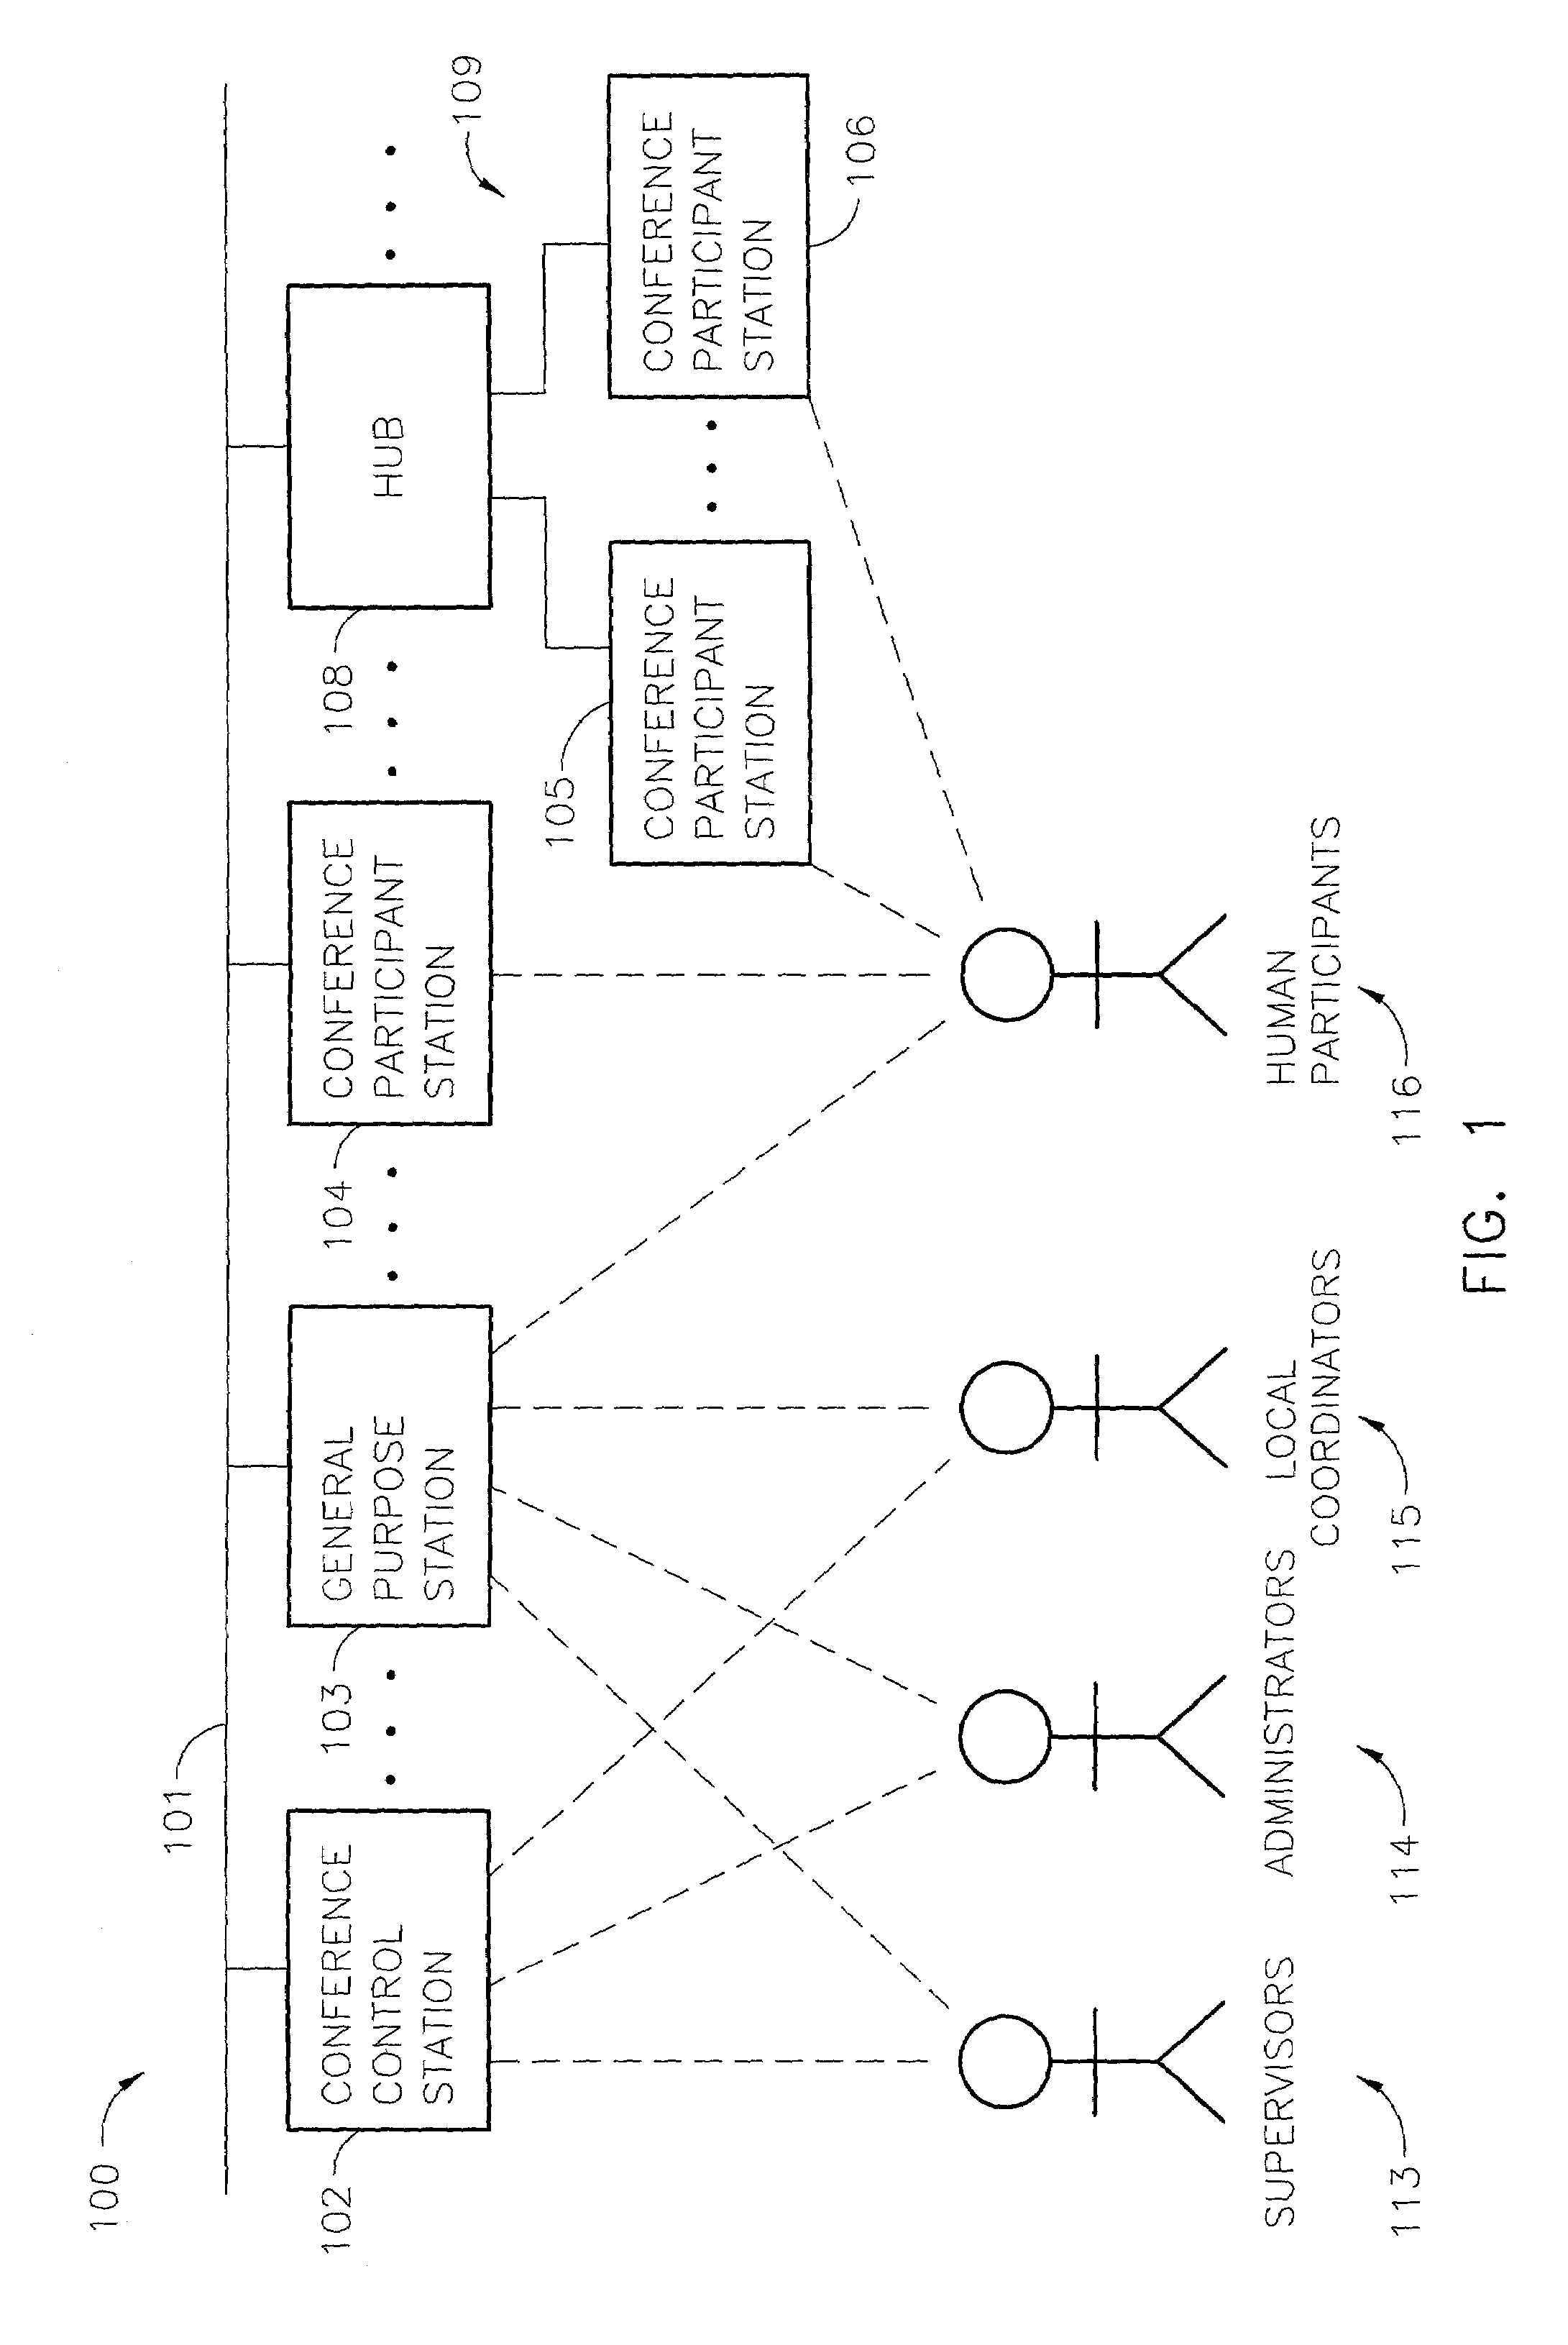 Video conference system and methods for use at multi-station sites